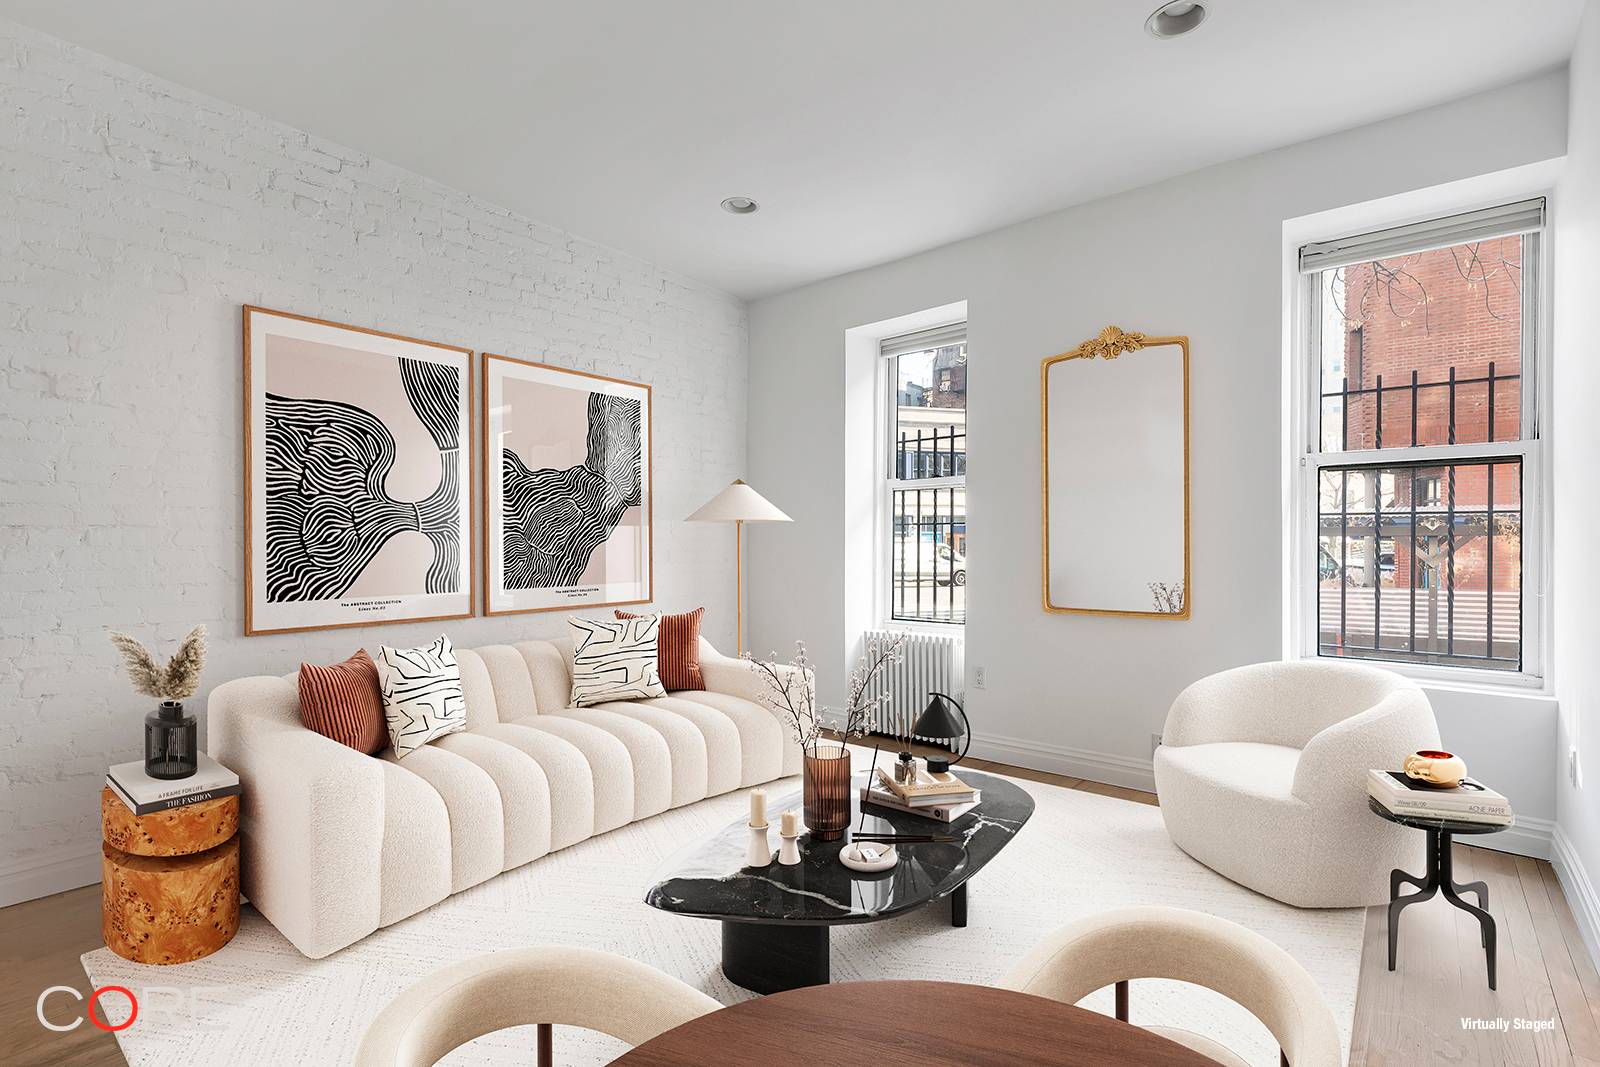 This charming West Village gem is ideally situated on idyllic tree lined Charles Street.